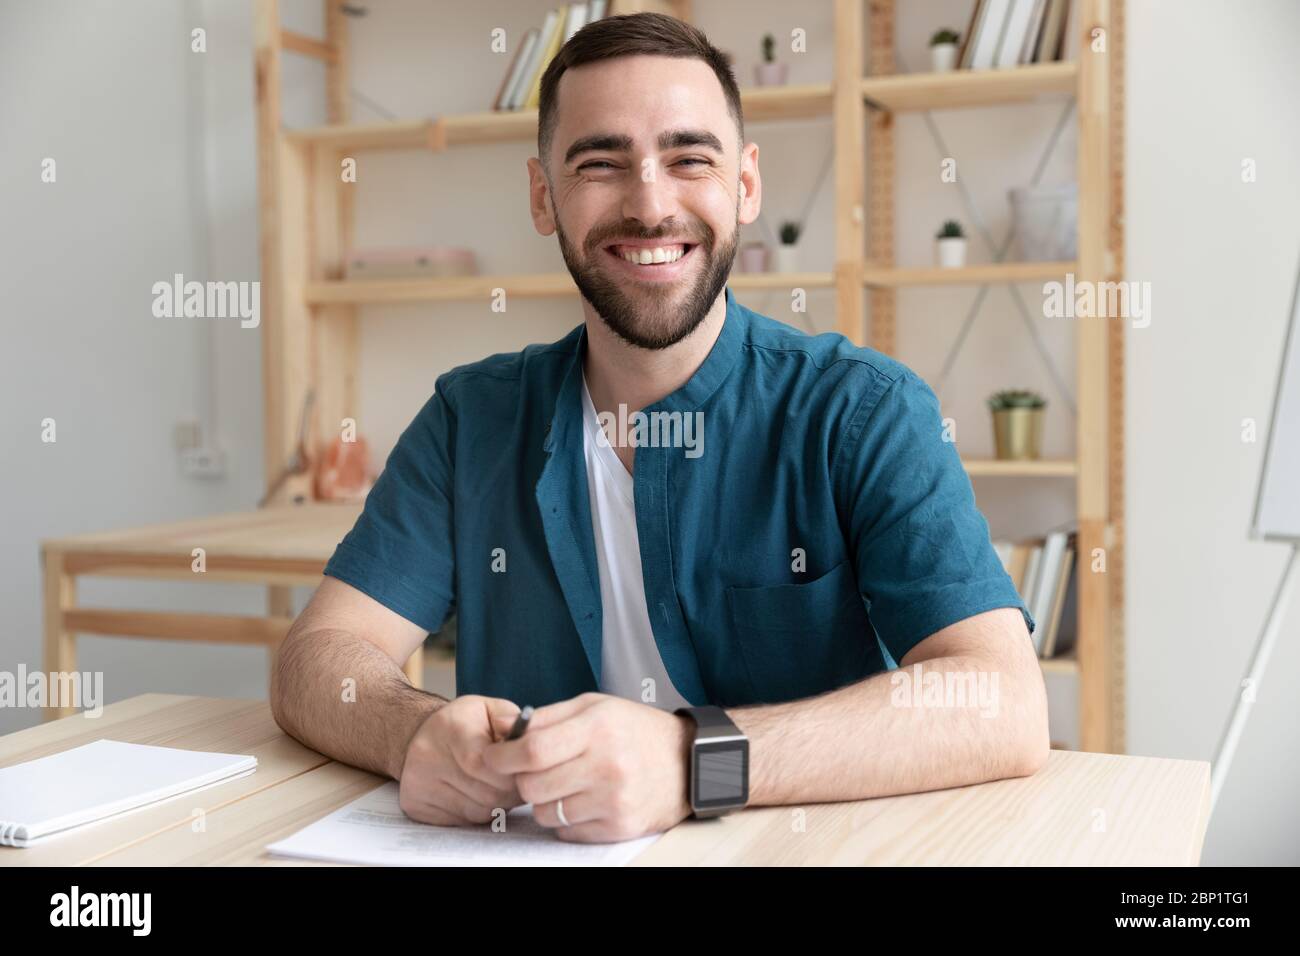 Close up happy bearded man hr makes good first impression. Stock Photo